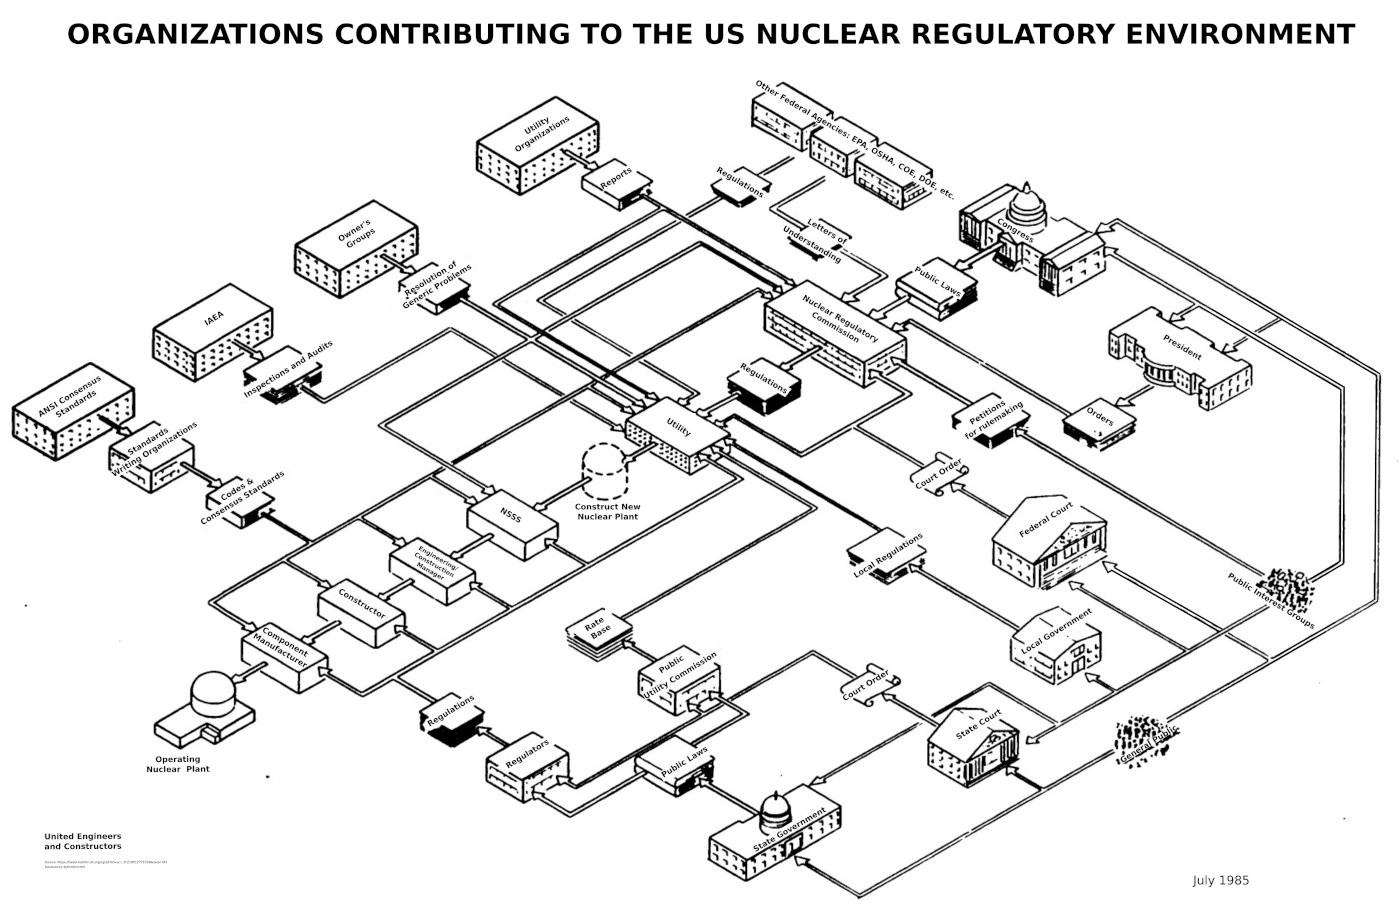 Flow map depicting about 15 institutions flowing requirements through the NRC, utility to one nuclear reactor.